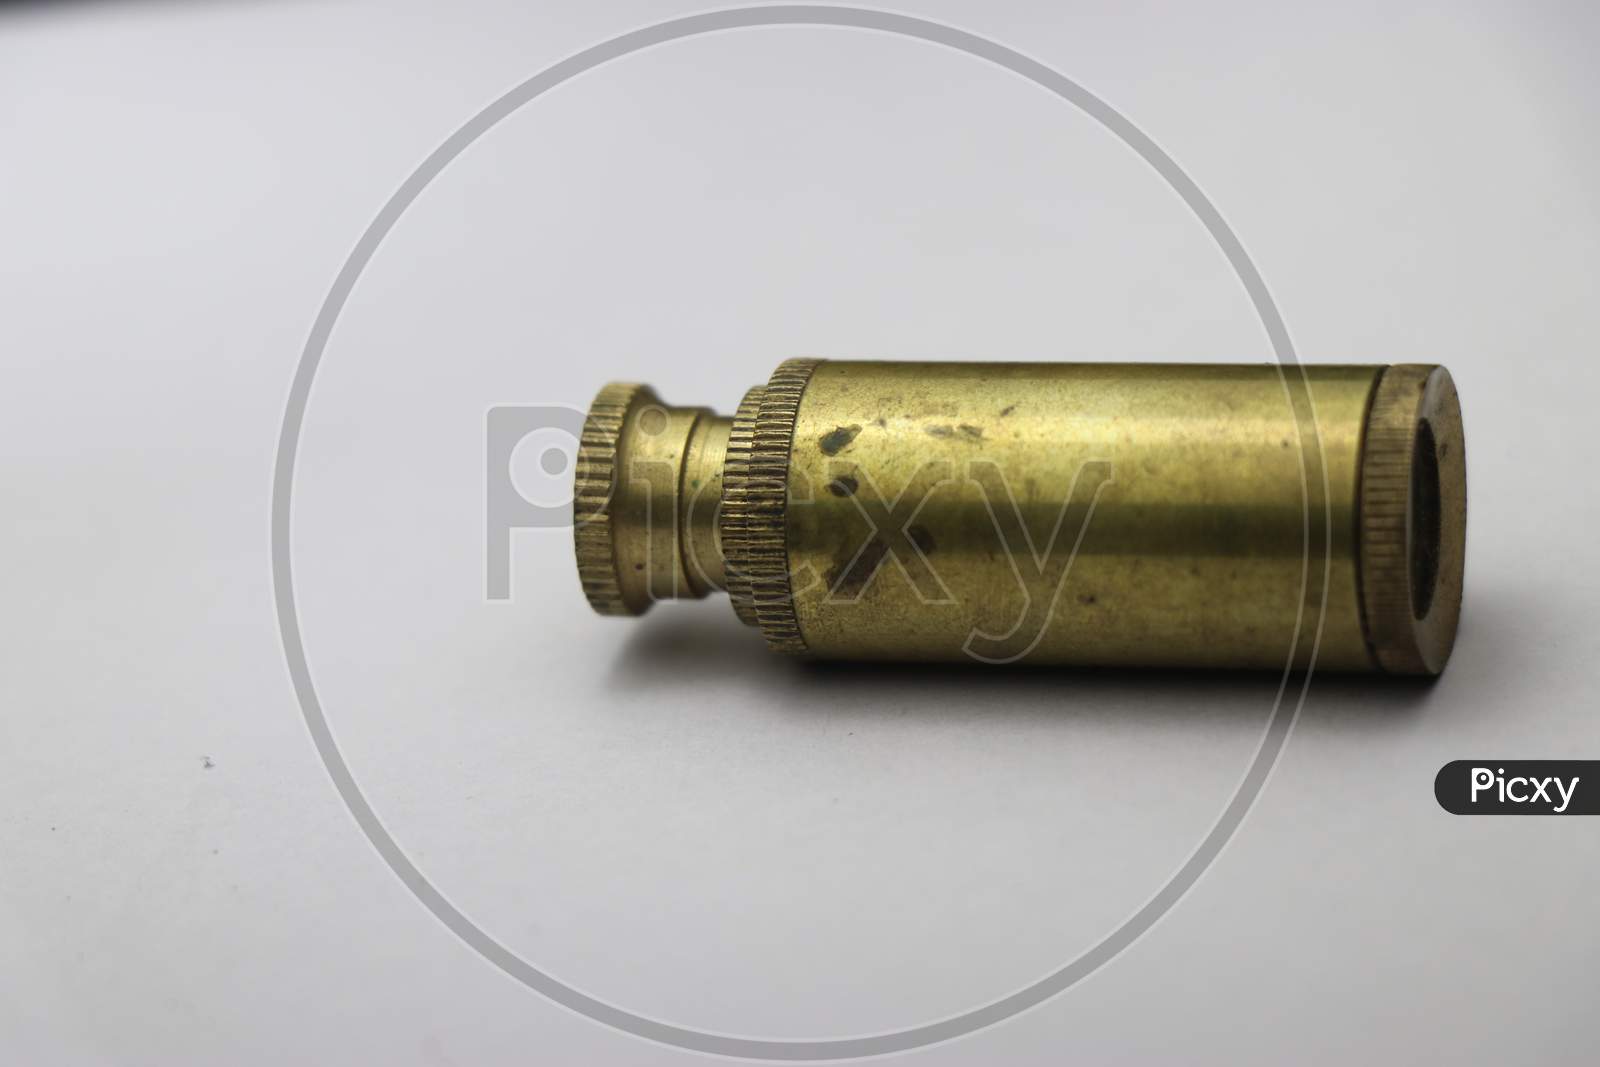 Brass Telescope Which Is Old Fashioned Used As Equipment To See Large Distance Objects